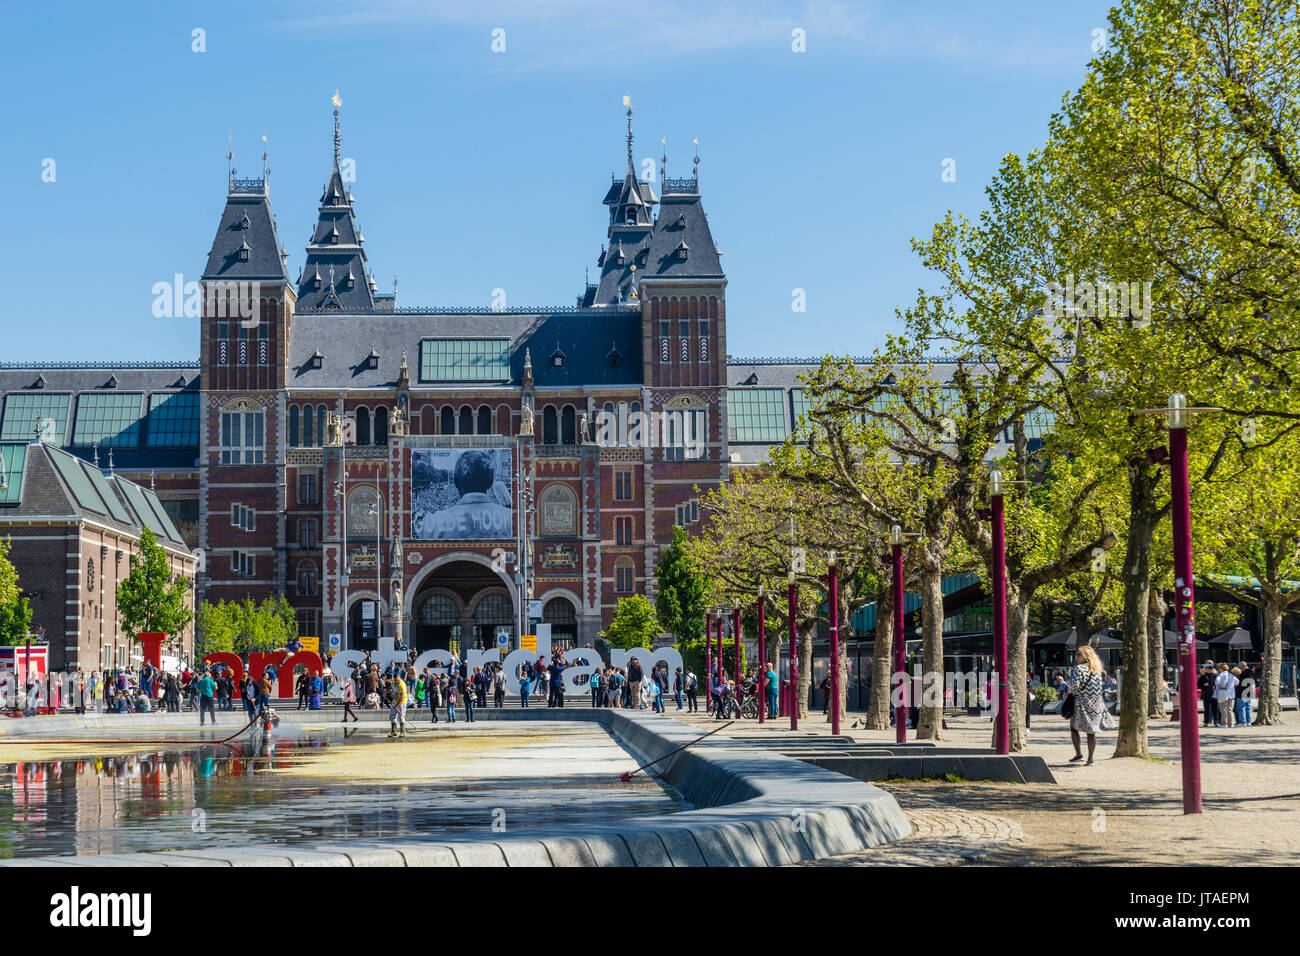 Rijksmuseum, Amsterdam, Pays-Bas, Europe Banque D'Images